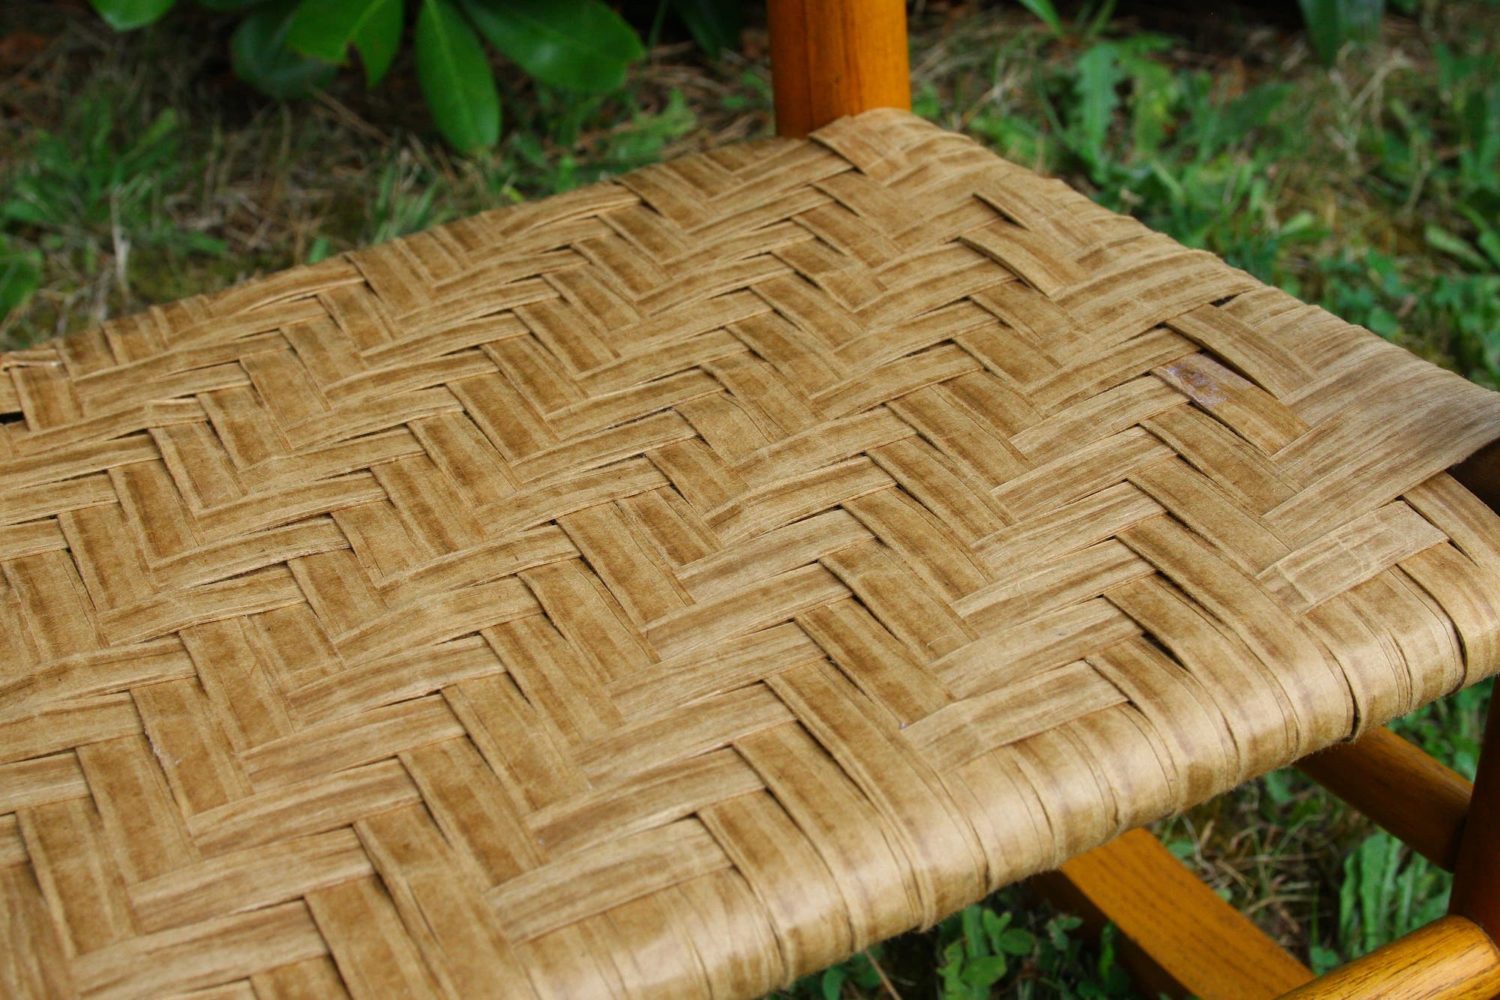 Splint Woven Seats | A Cane Wood and Wicker Fixer